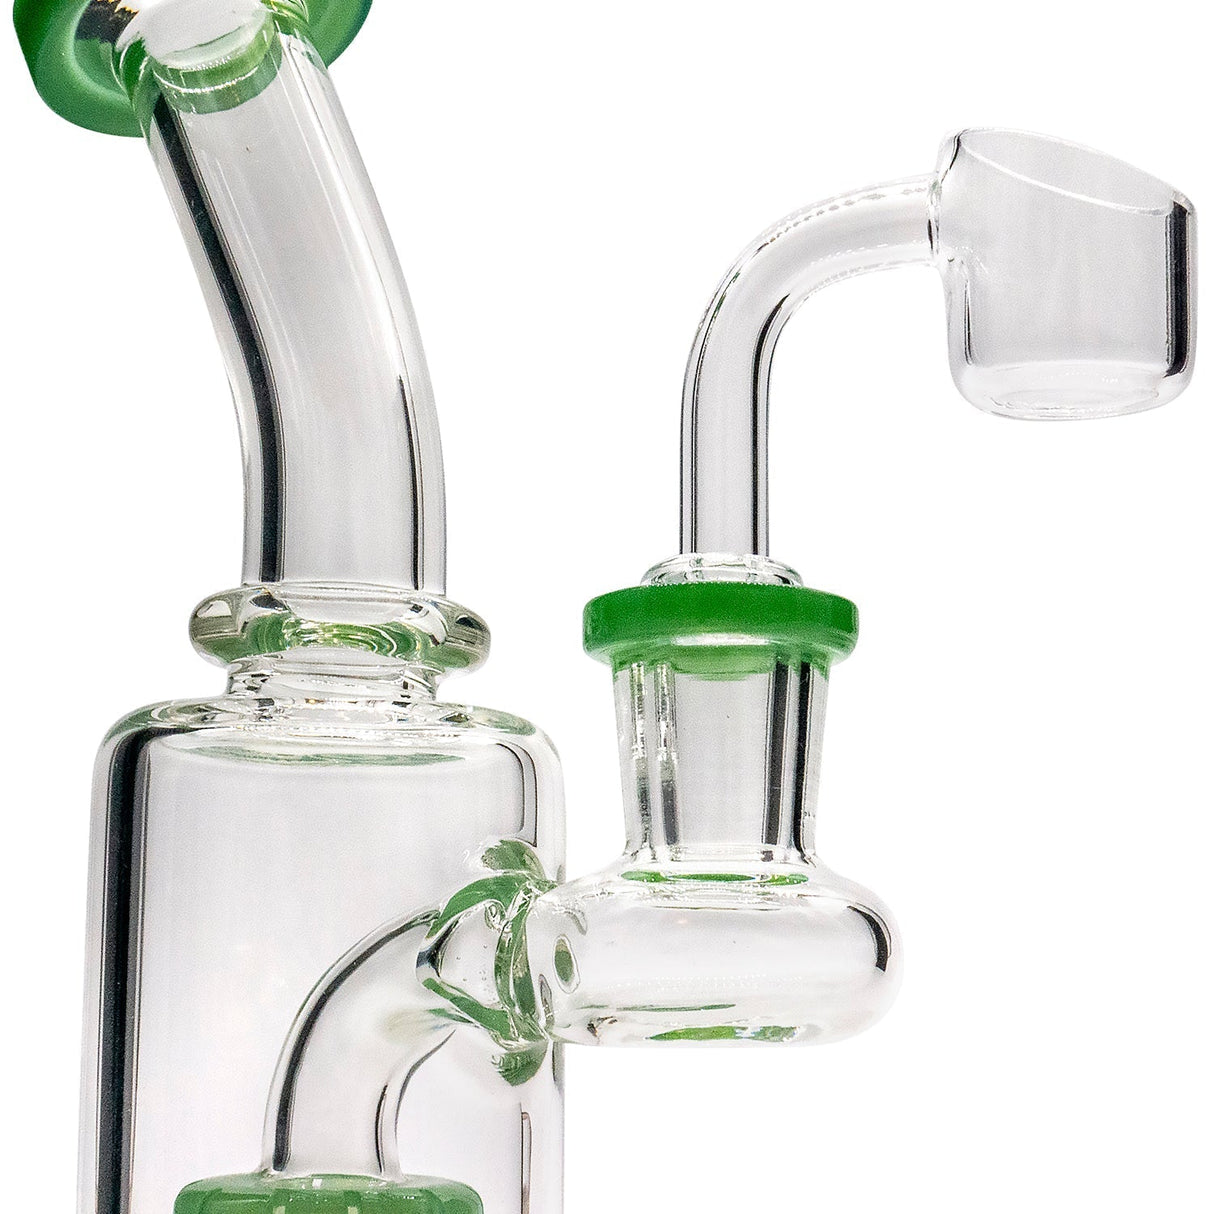 Glassic "Spritz" 6.5" Dab Rig with green shower-head perc, 90 degree joint, side view